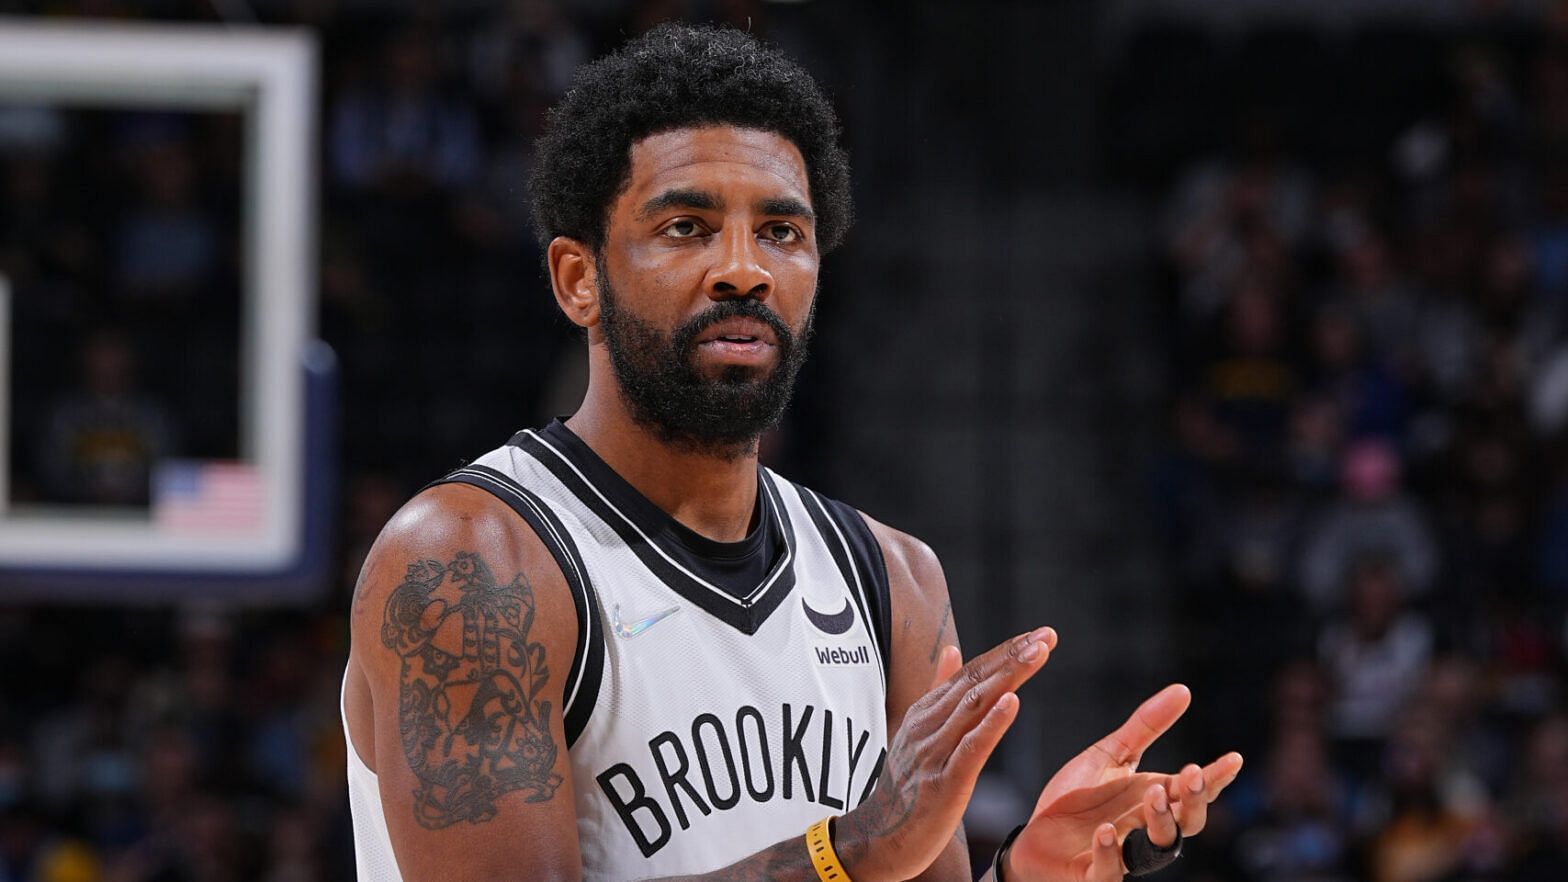 Three tumultuous seasons with Kyrie Irving has the Brooklyn Nets reeling. [NBA.com]